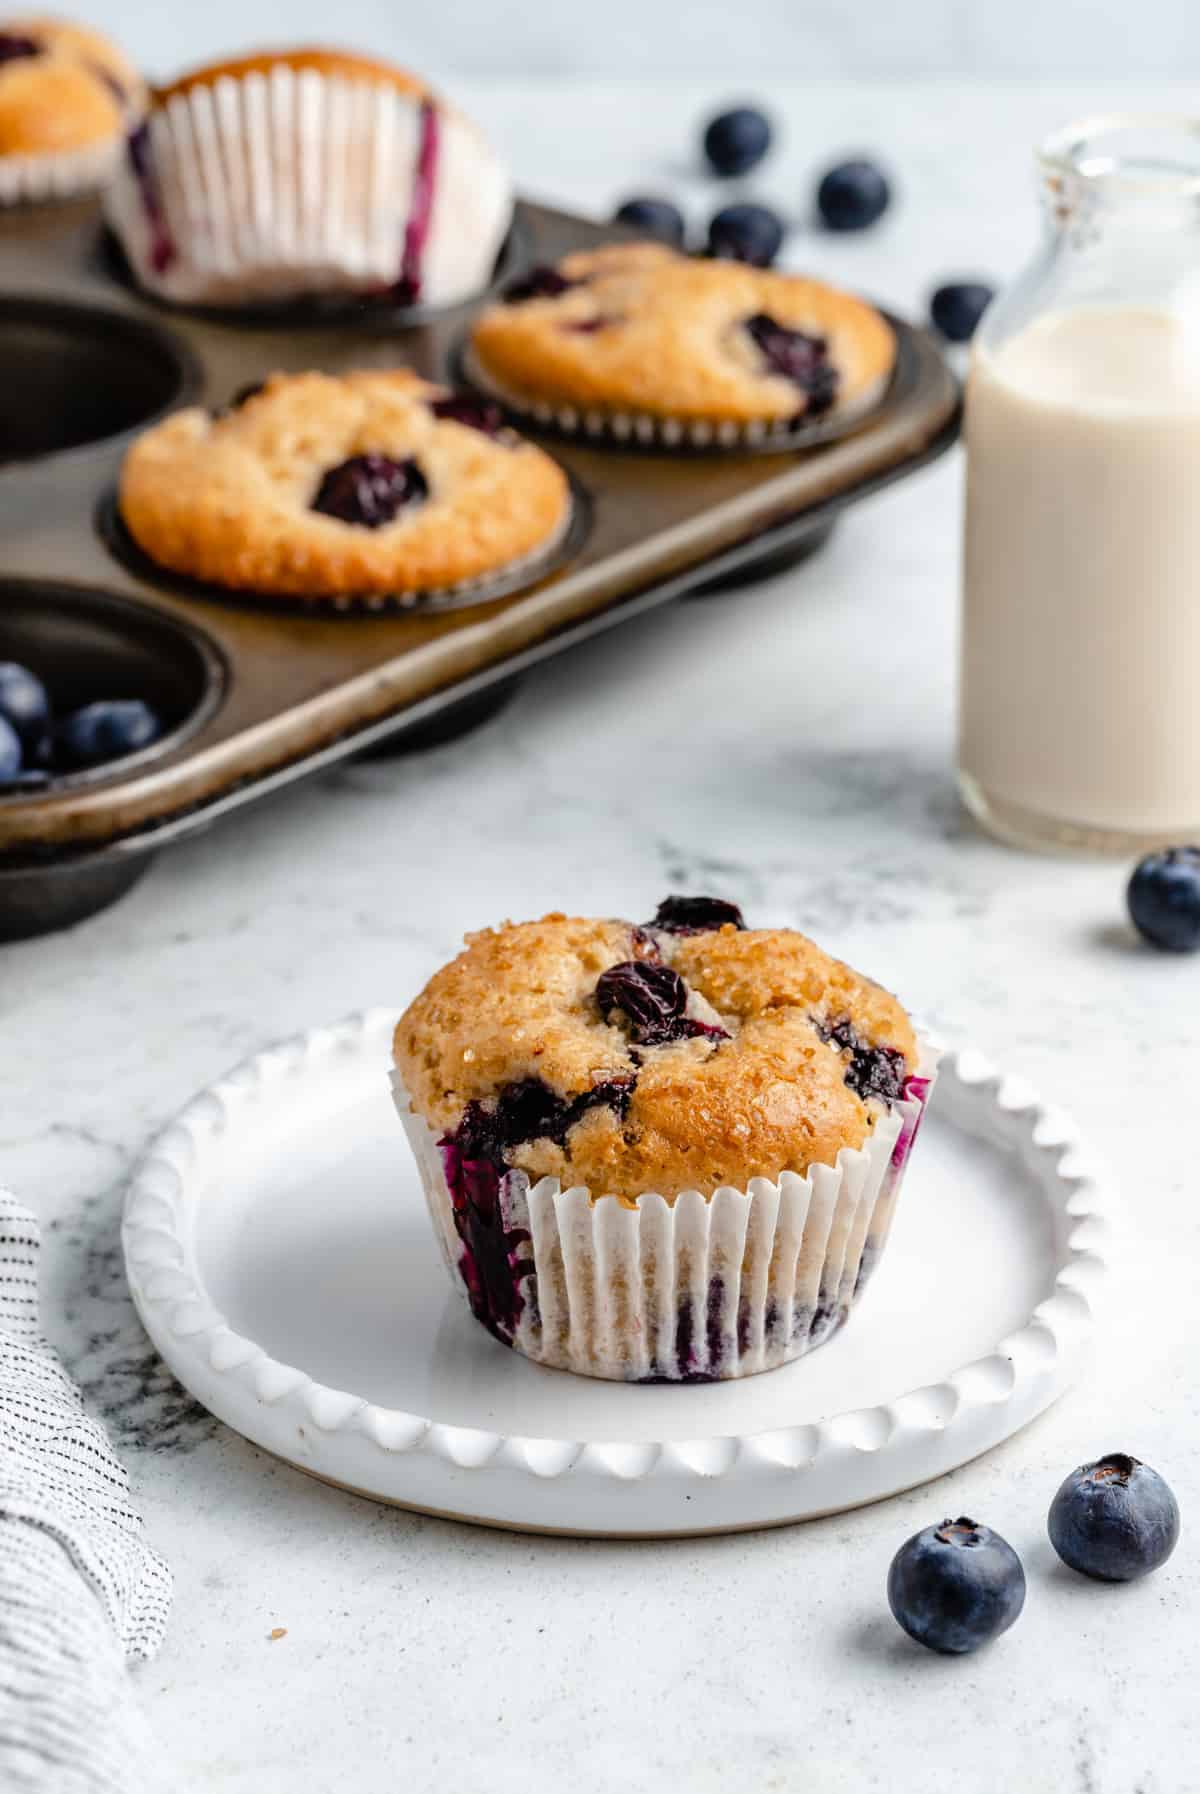 Blueberry muffin on a plate.